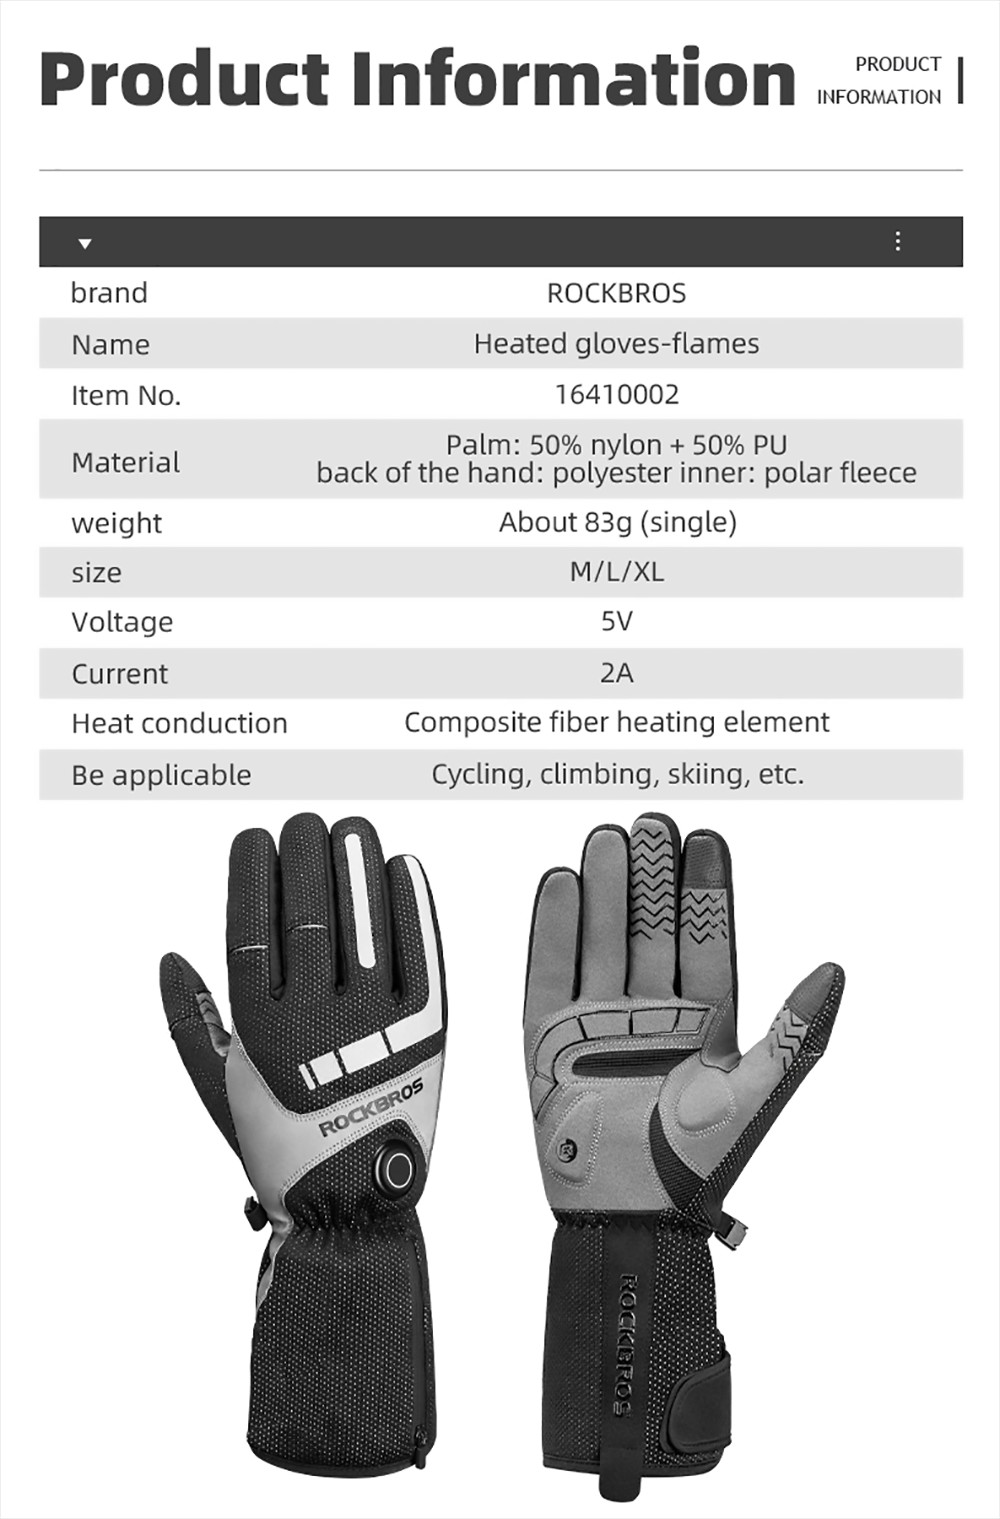 ROCKBROS Motorcycle Gloves Waterproof Heated Thermal Heated Gloves Touch Screen Battery Powered Cycling Skiing Gloves - XL